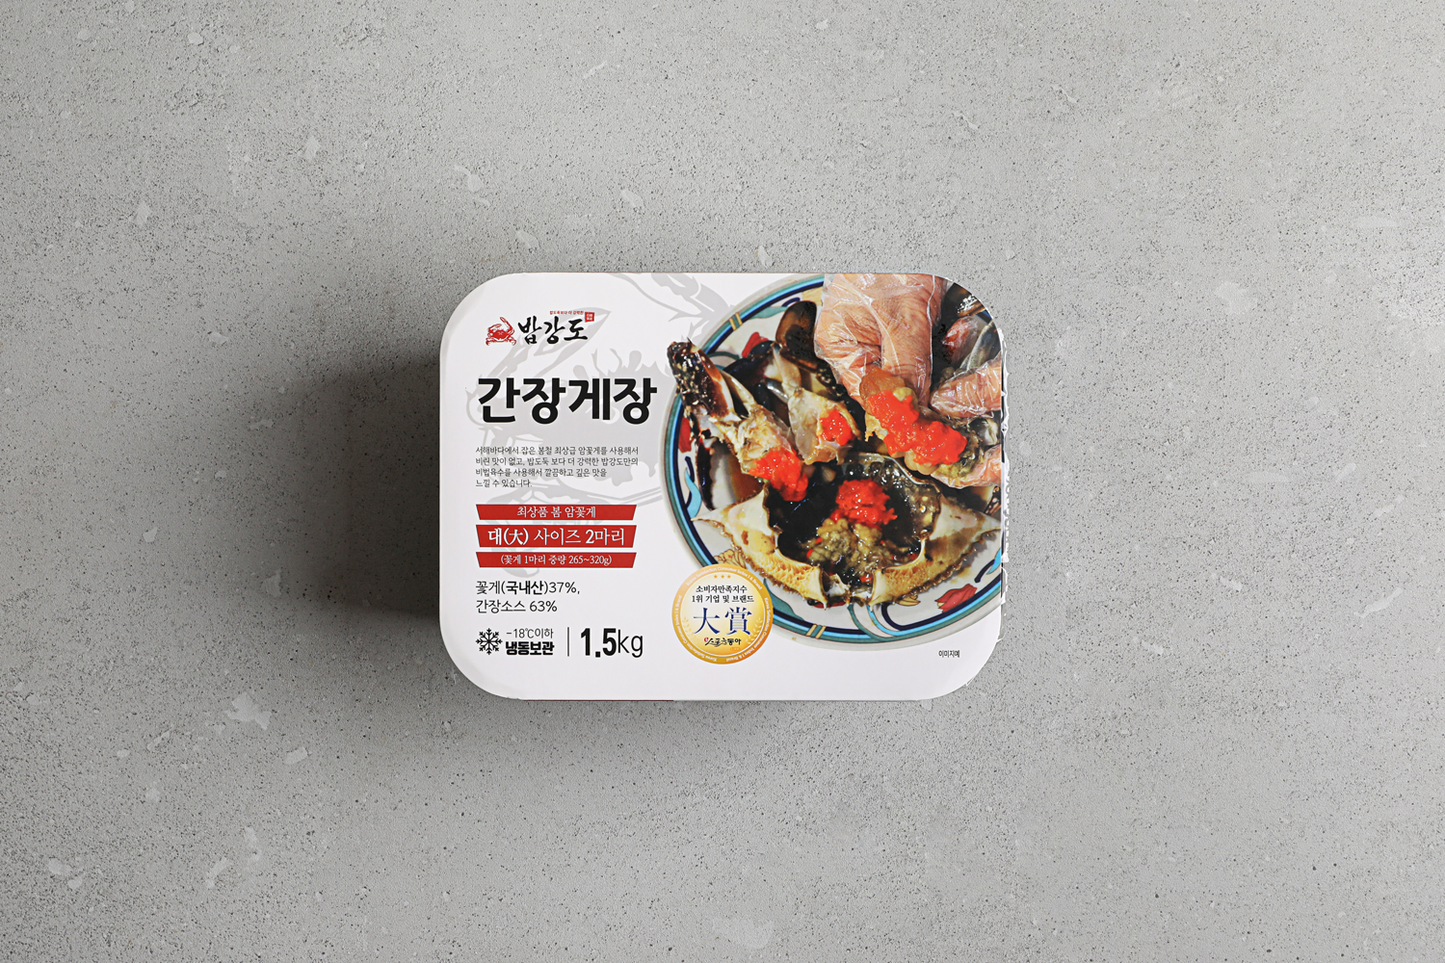 Babkangdo Ganjang Gejang 1.5kg (Raw Crabs Marinated in Soy Sauce) - Delivery available only in Korea